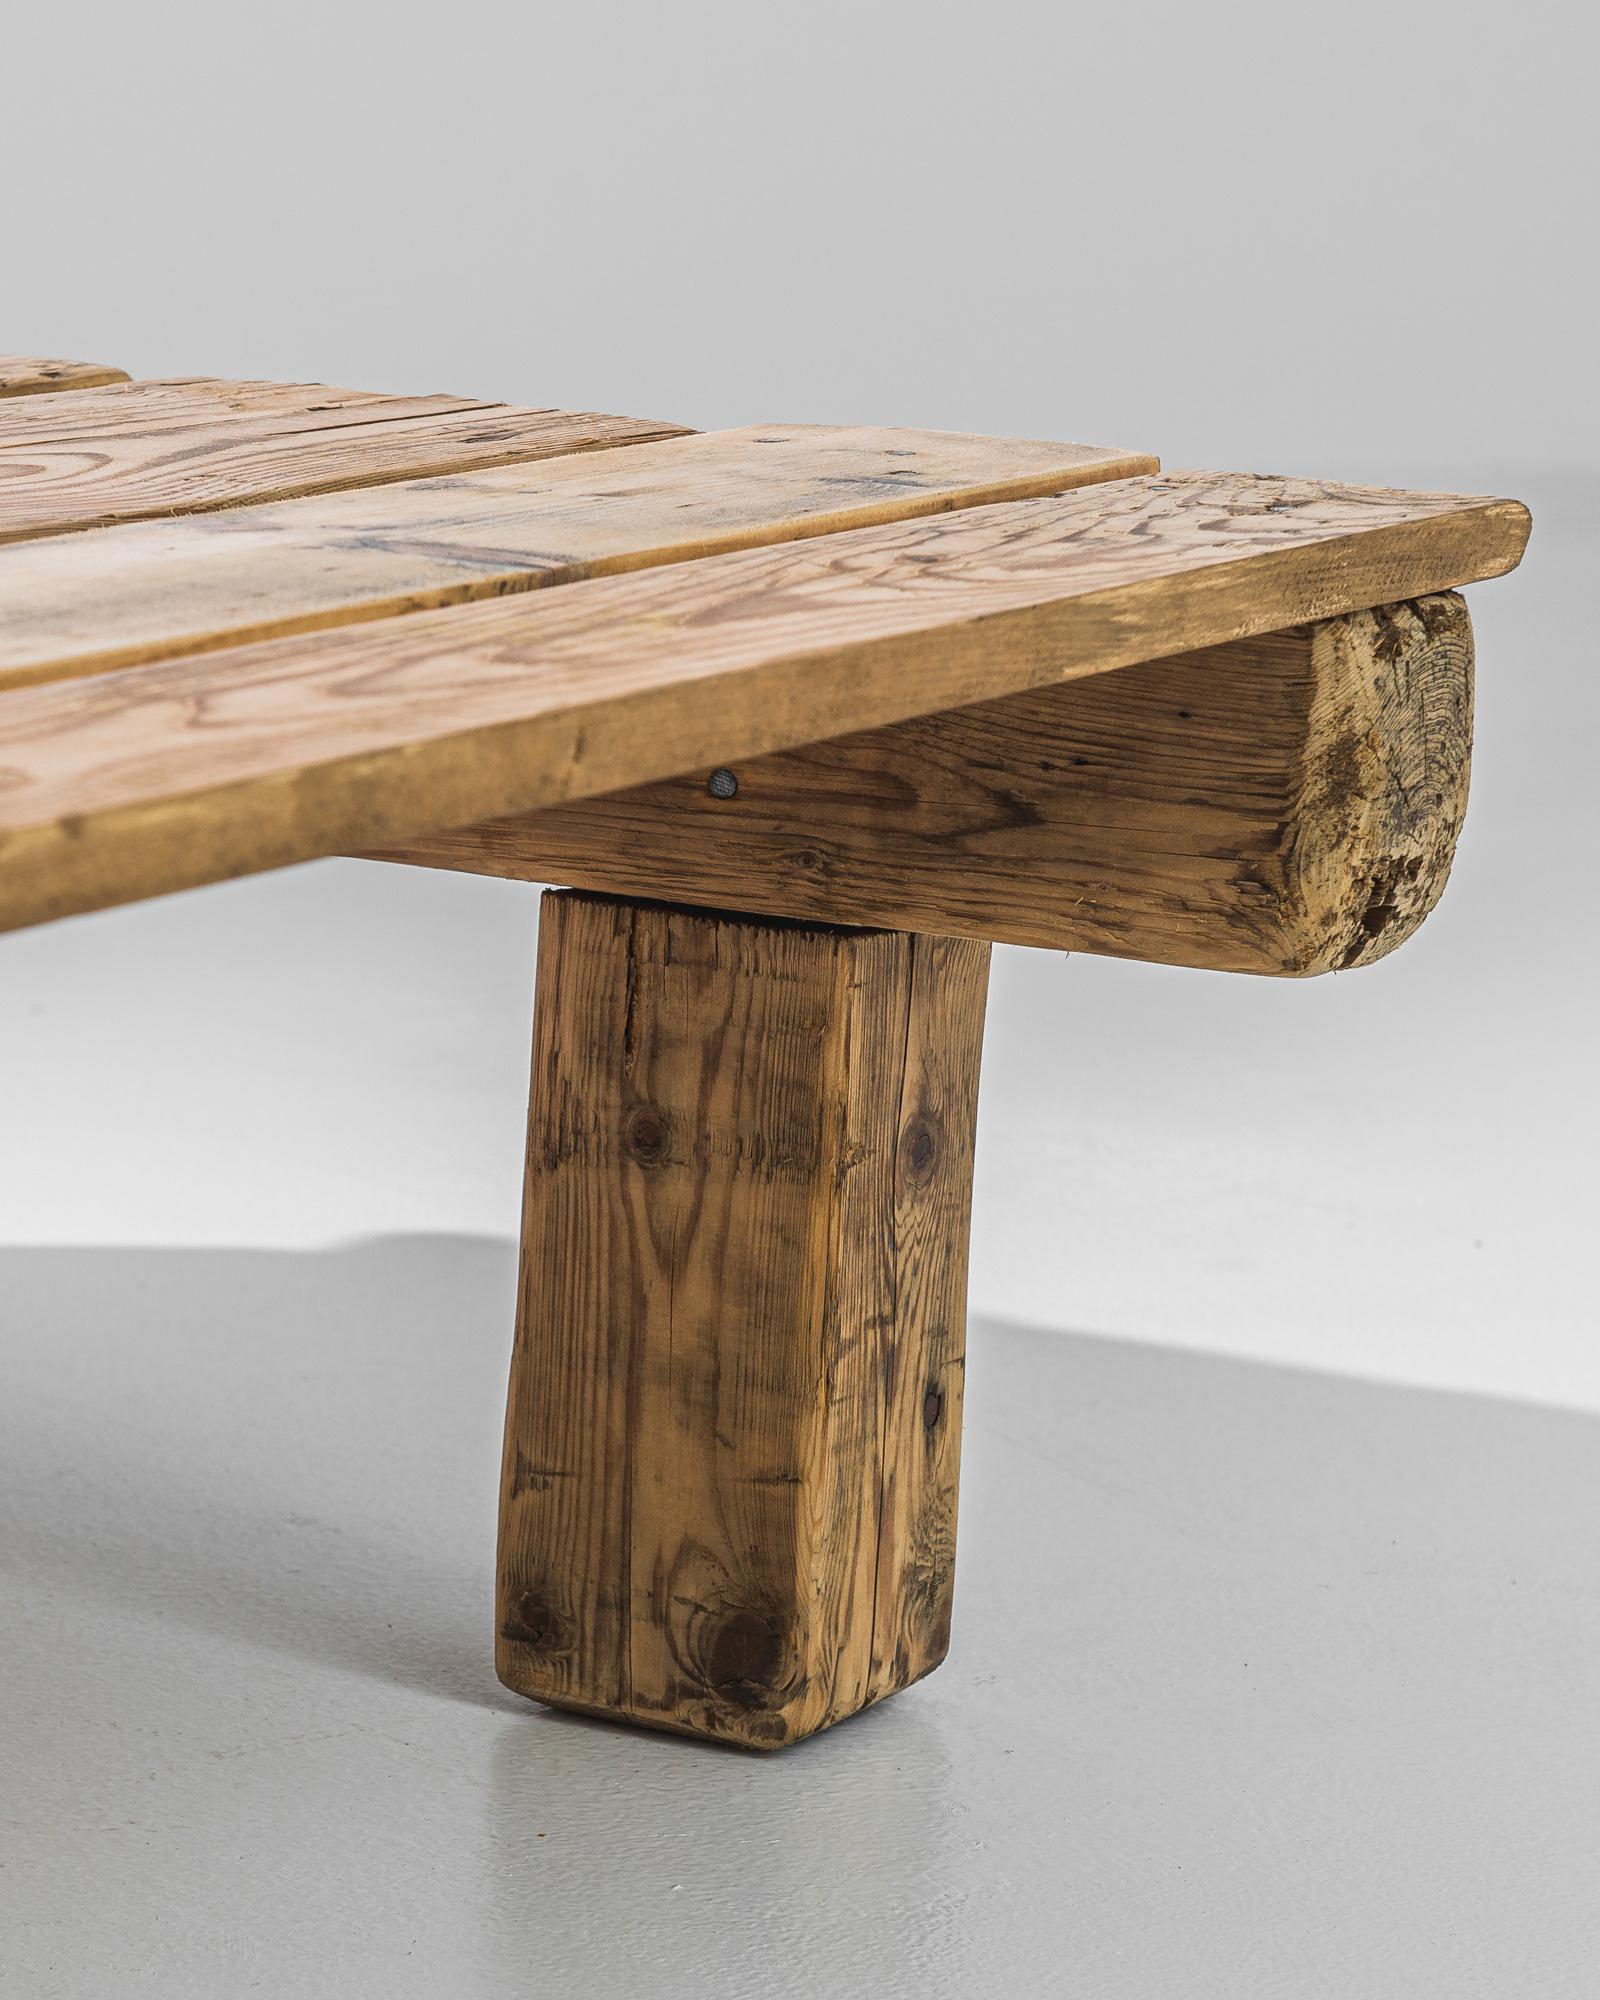 Mellow and rustic, this wooden coffee table has an unvarnished simplicity. Made in Czechia in the 1950s, a low-set tabletop of wooden boards rests upon an arrangement of wooden posts. The organic finish and soft biscuit tone of the natural wood give